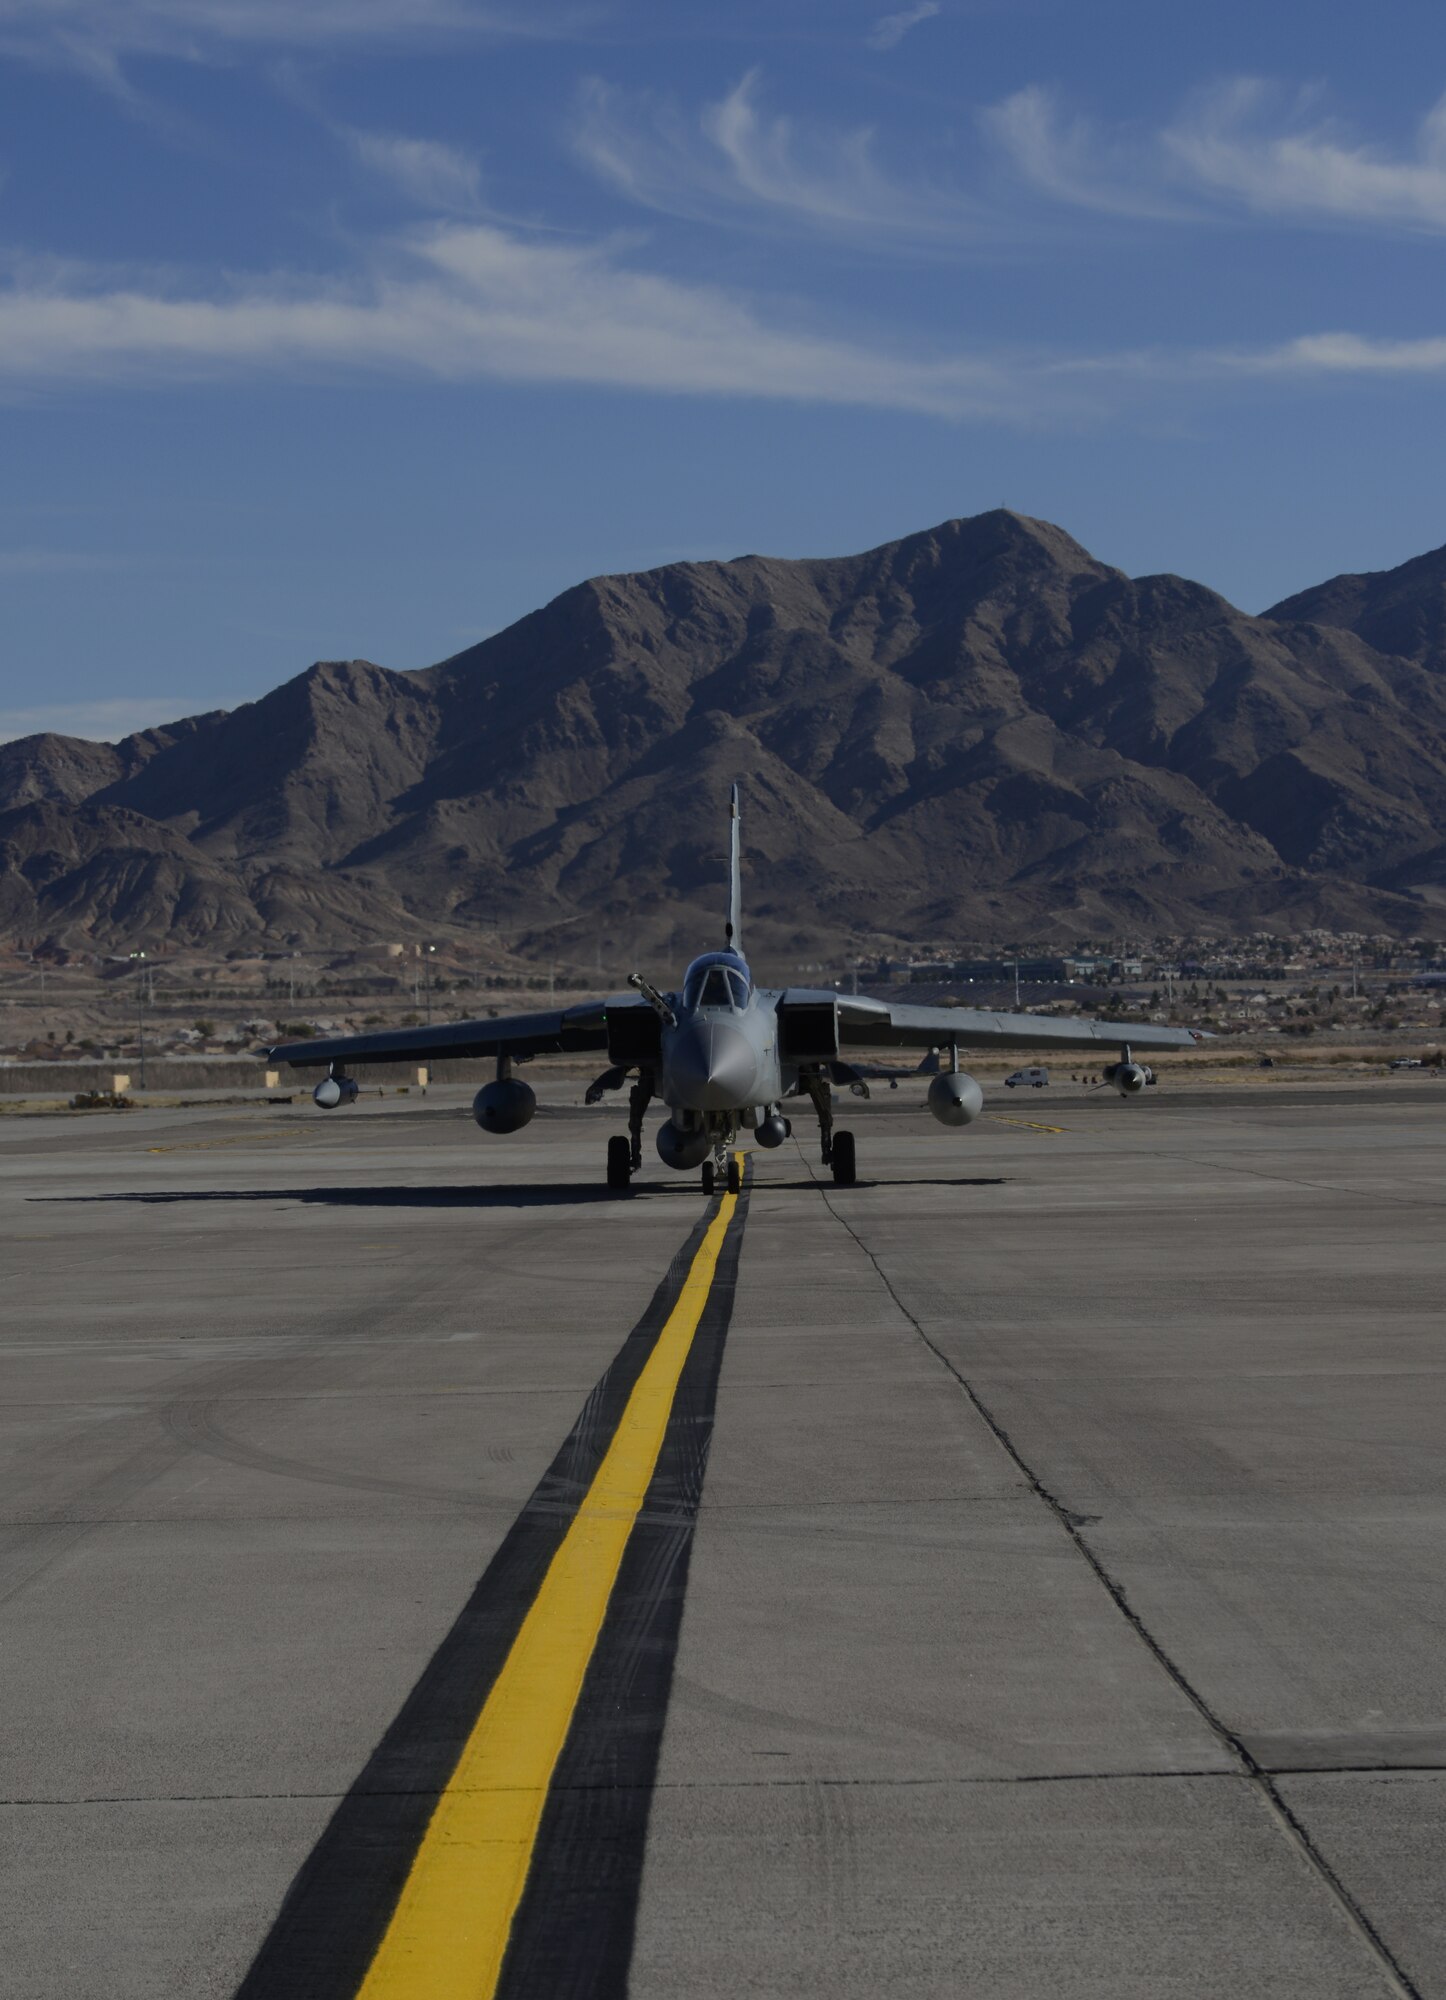 A British Royal Air Force Tornado GR4 taxis on the runway upon its arrival at Nellis Air Force Base, Nev., Jan. 22, 2013. The IX (B) Squadron recently deployed to the Gulf in 2003 to take part in Operation Telic, the United Kingdom's contribution to Operation Iraqi Freedom. (U.S. Air Force photo by Senior Airman Benjamin Sutton/Released)